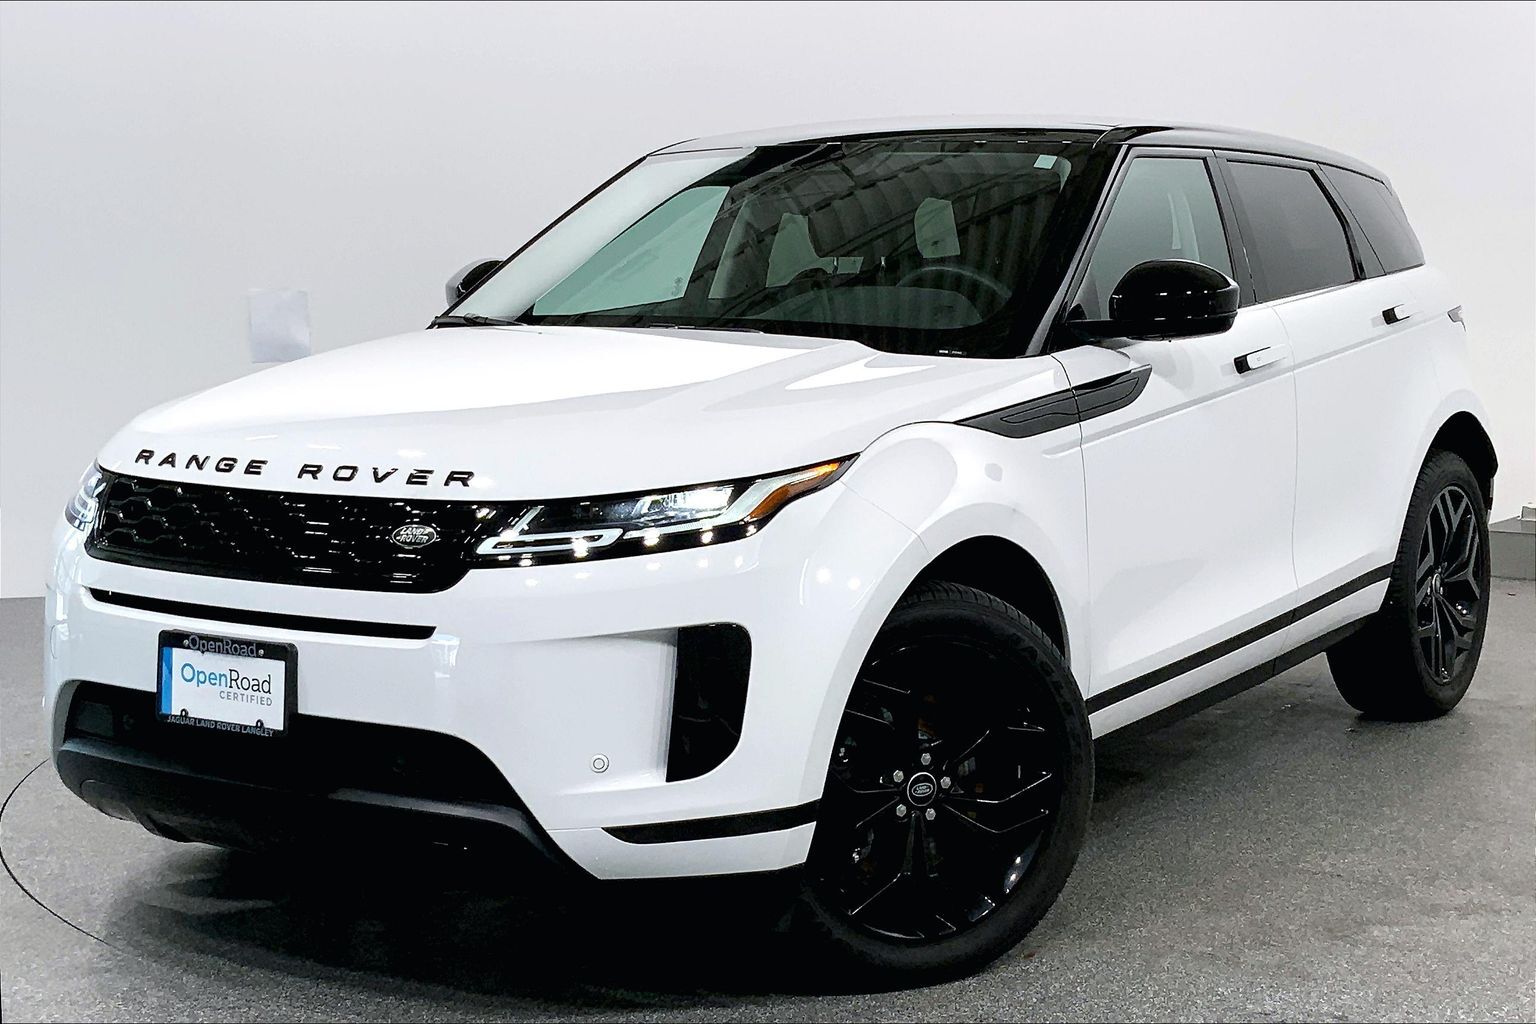 2023 Land Rover Range Rover Evoque Certified Pre-owned With Extended Warranty